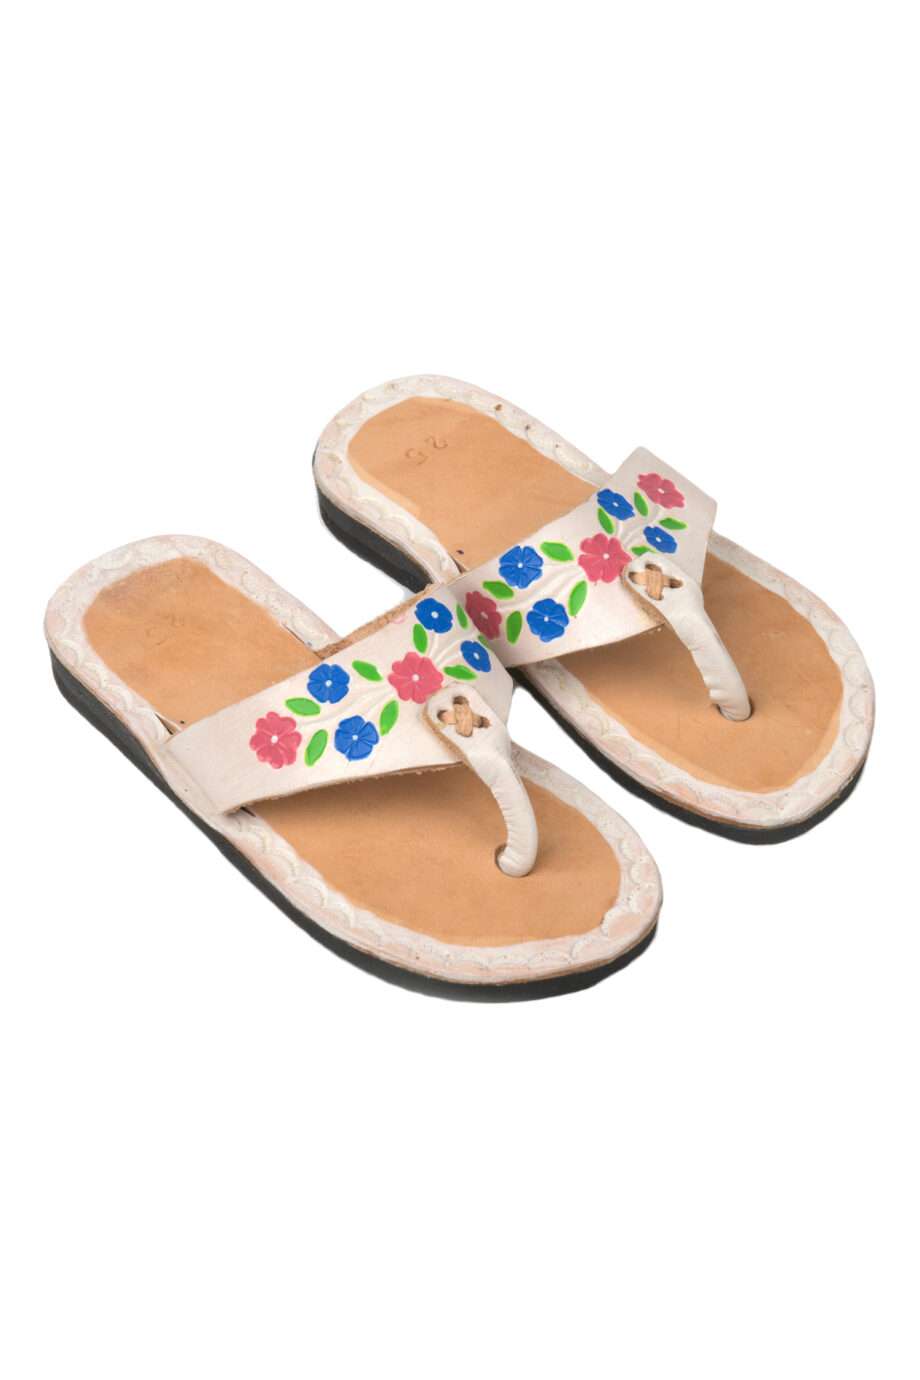 flor white leather flipflop kids small